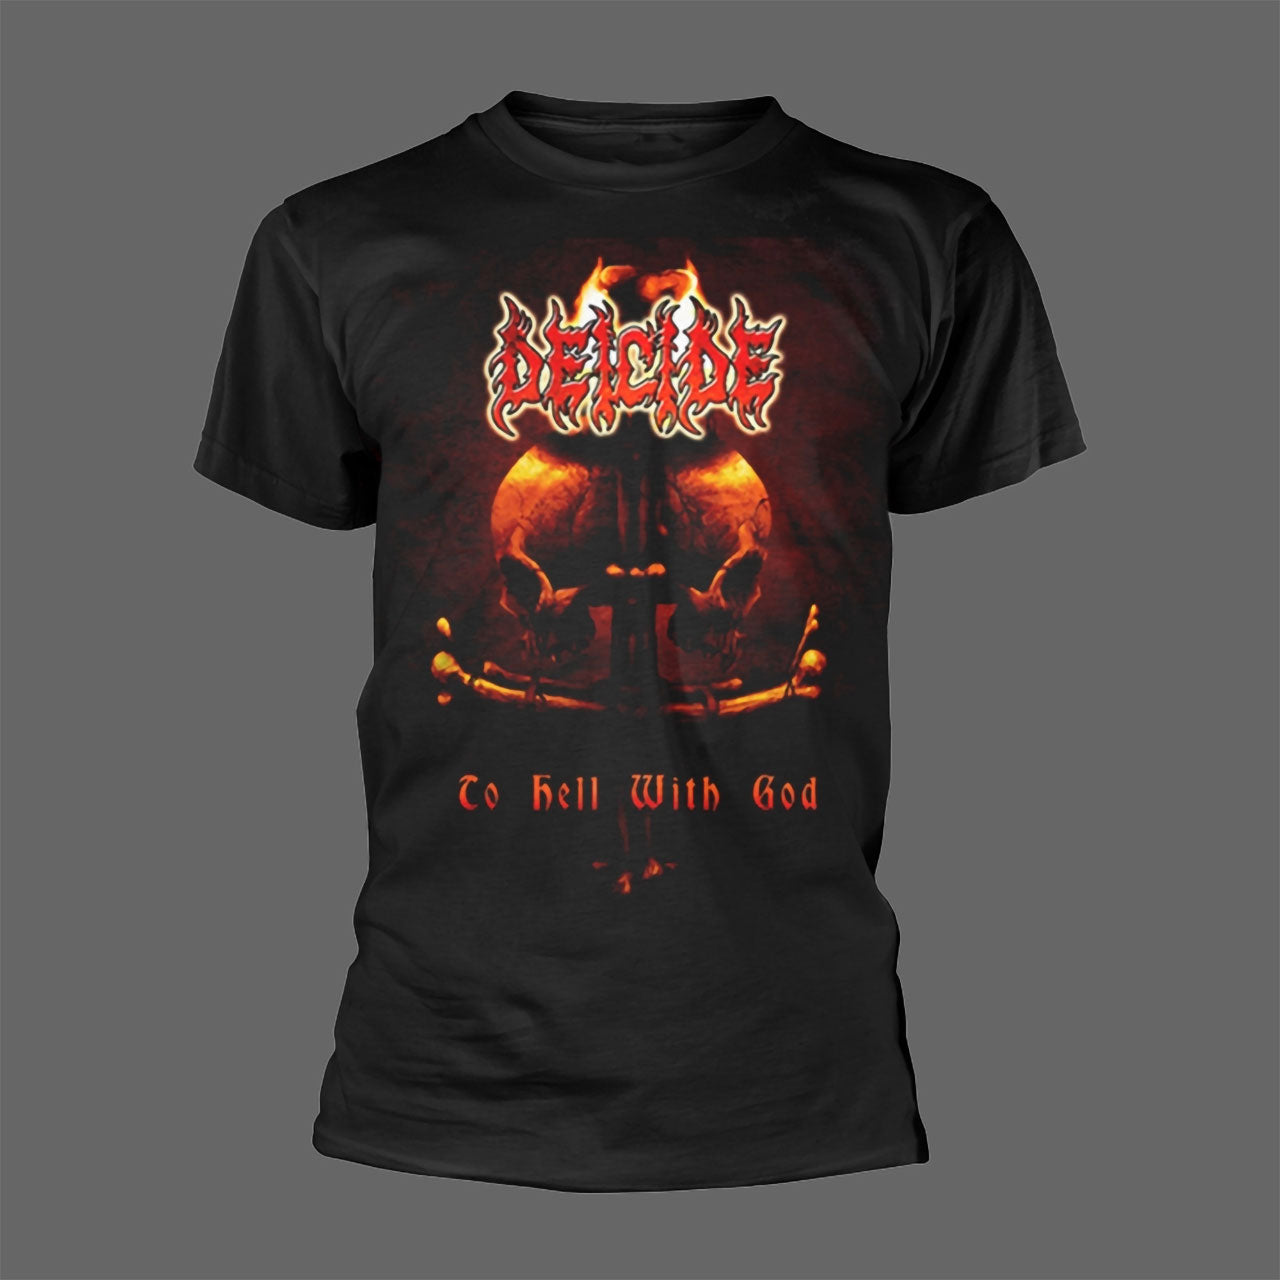 Deicide - To Hell with God Tour 2012 (T-Shirt)